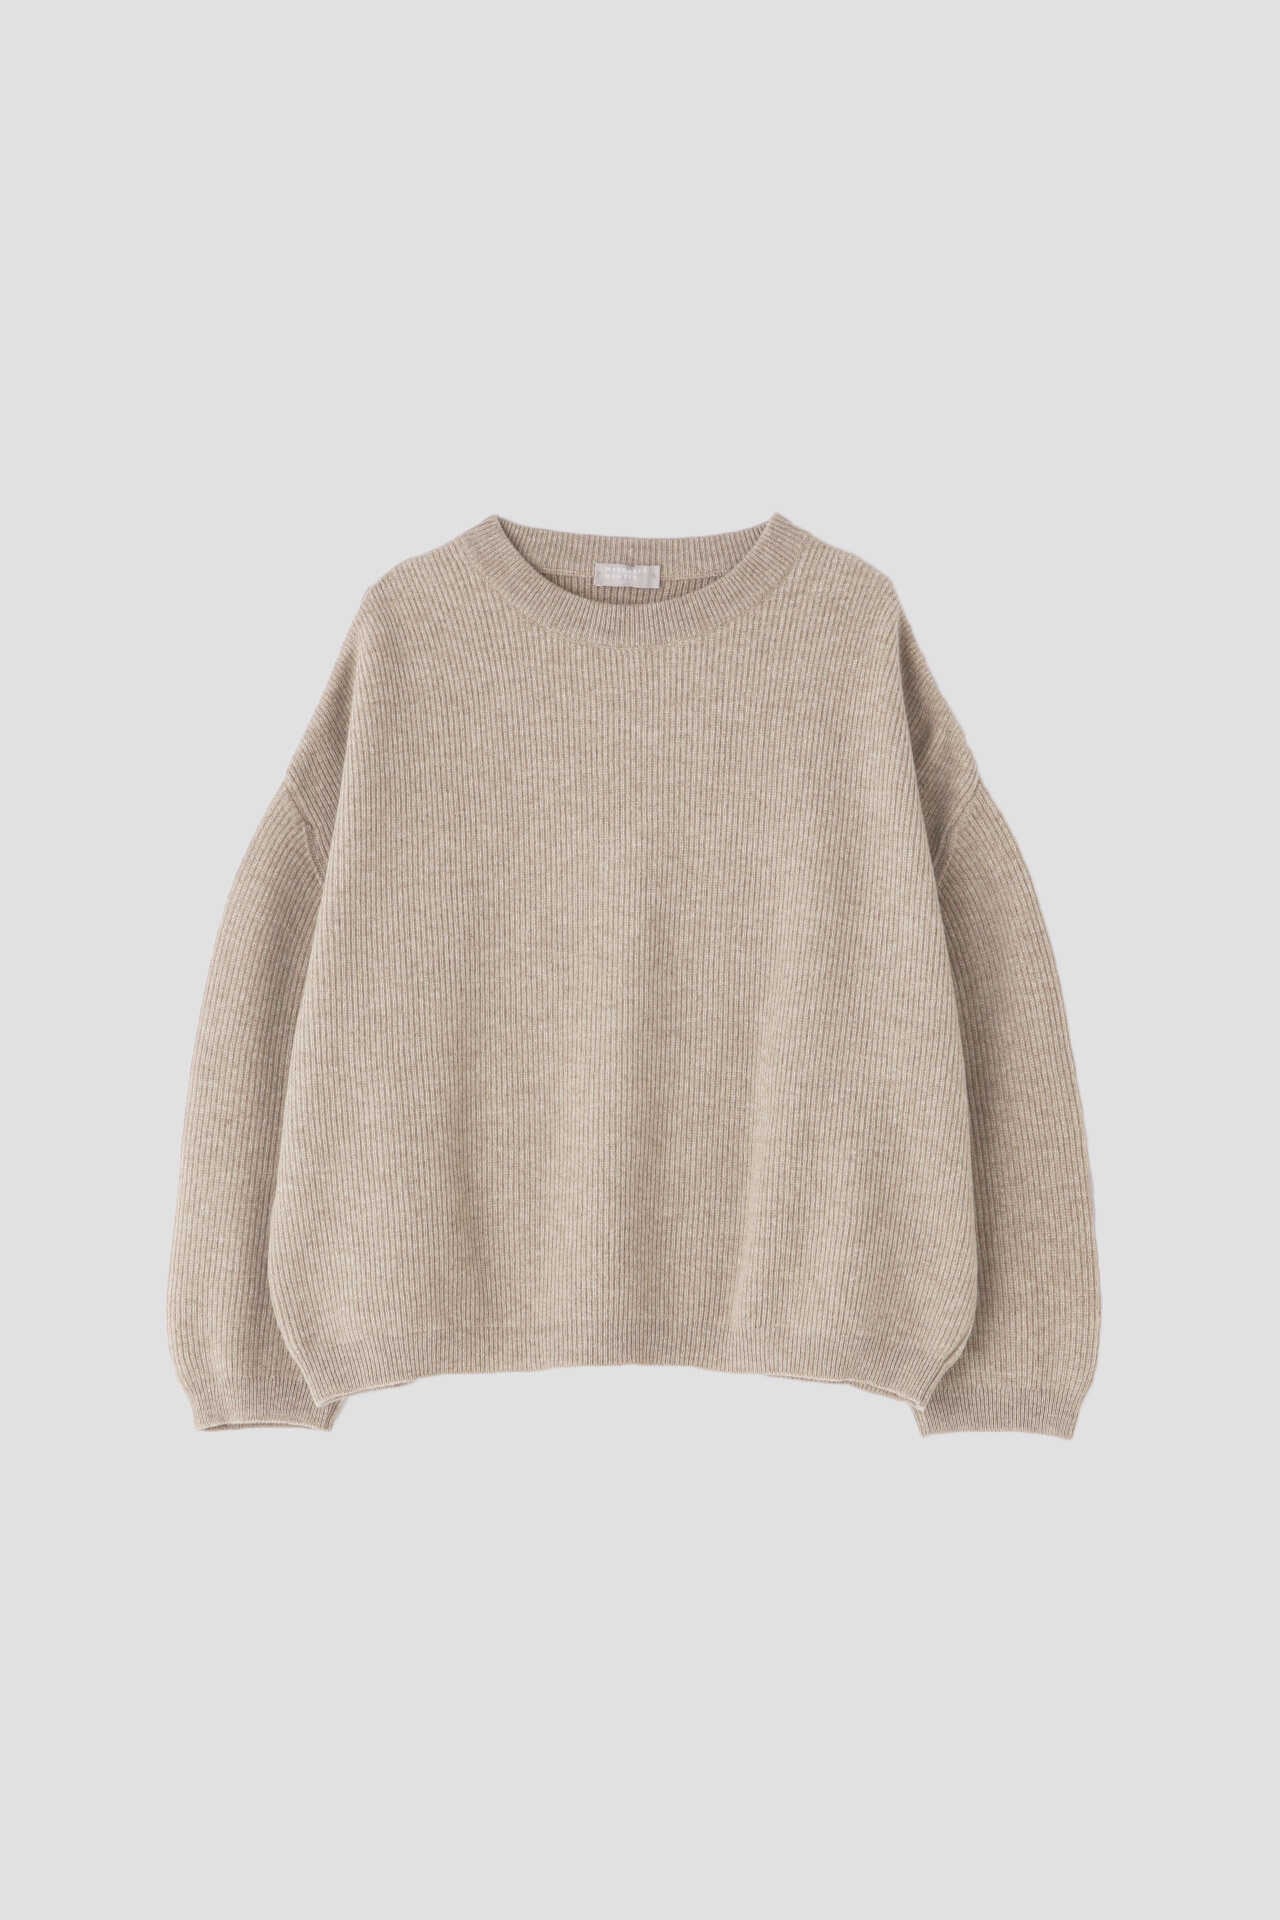 WOOL CASHMERE | MARGARET HOWELL